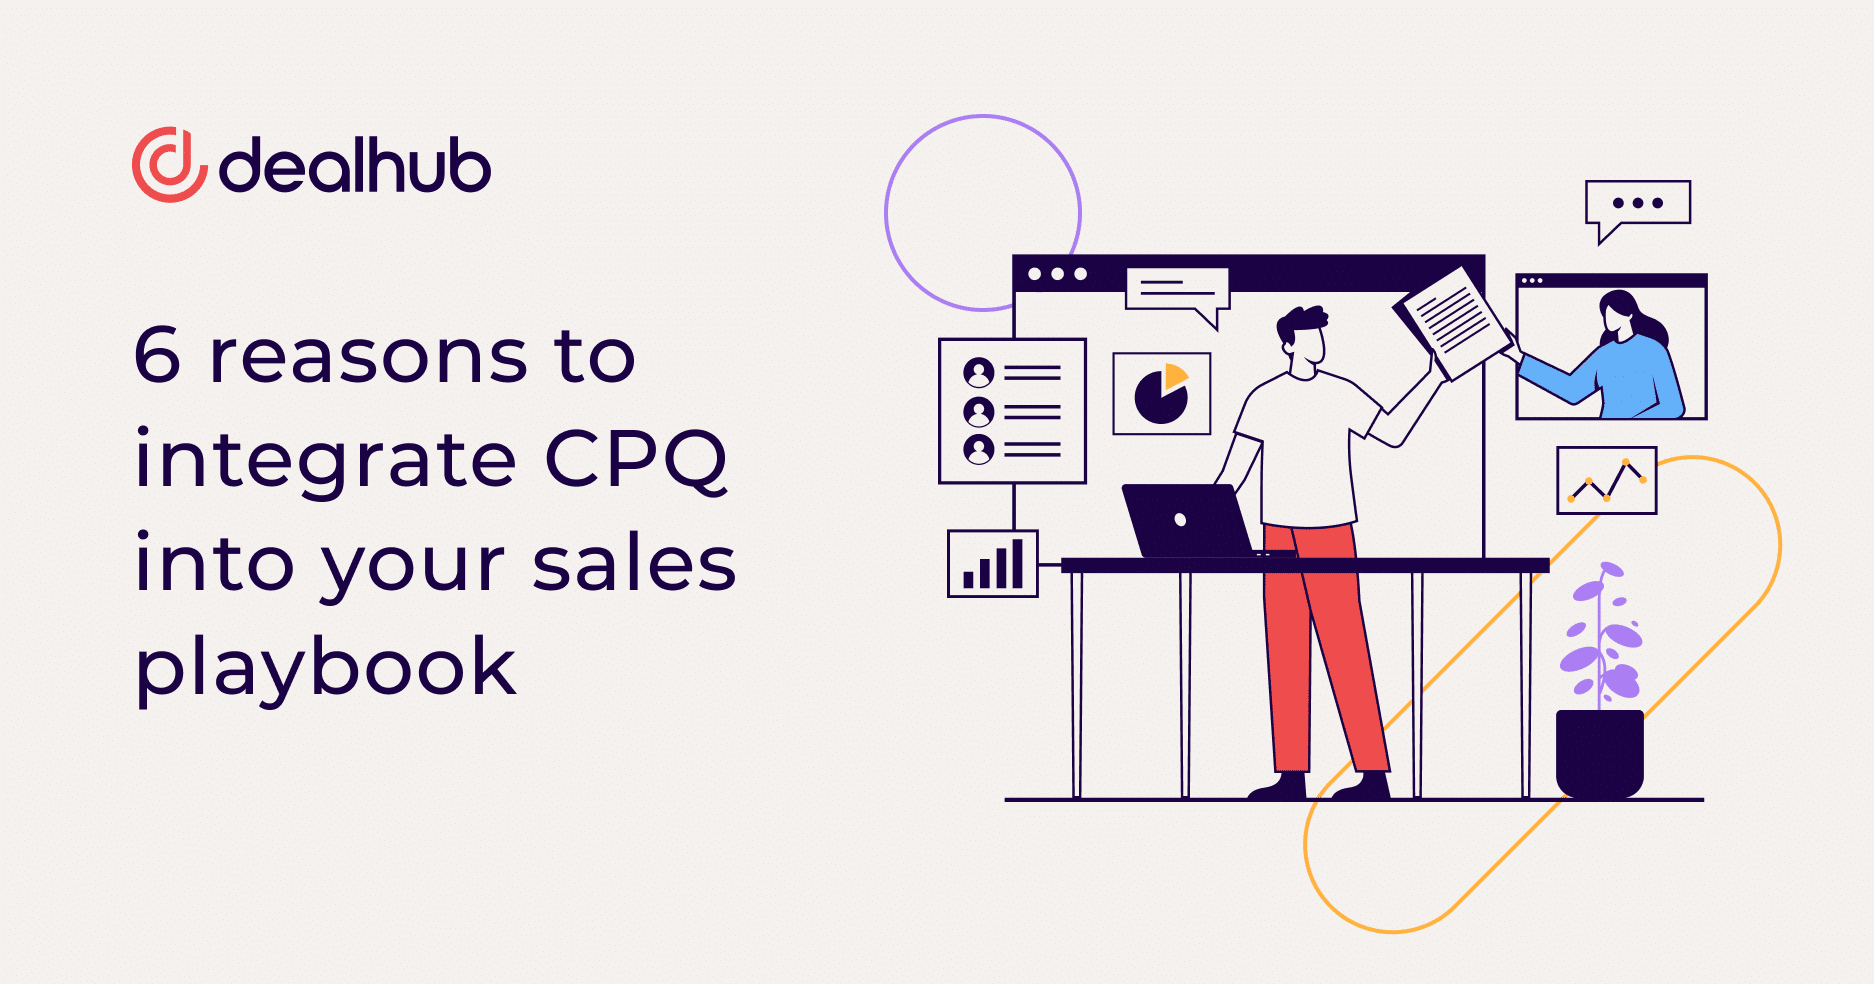 6 reasons to integrate CPQ into your sales playbook